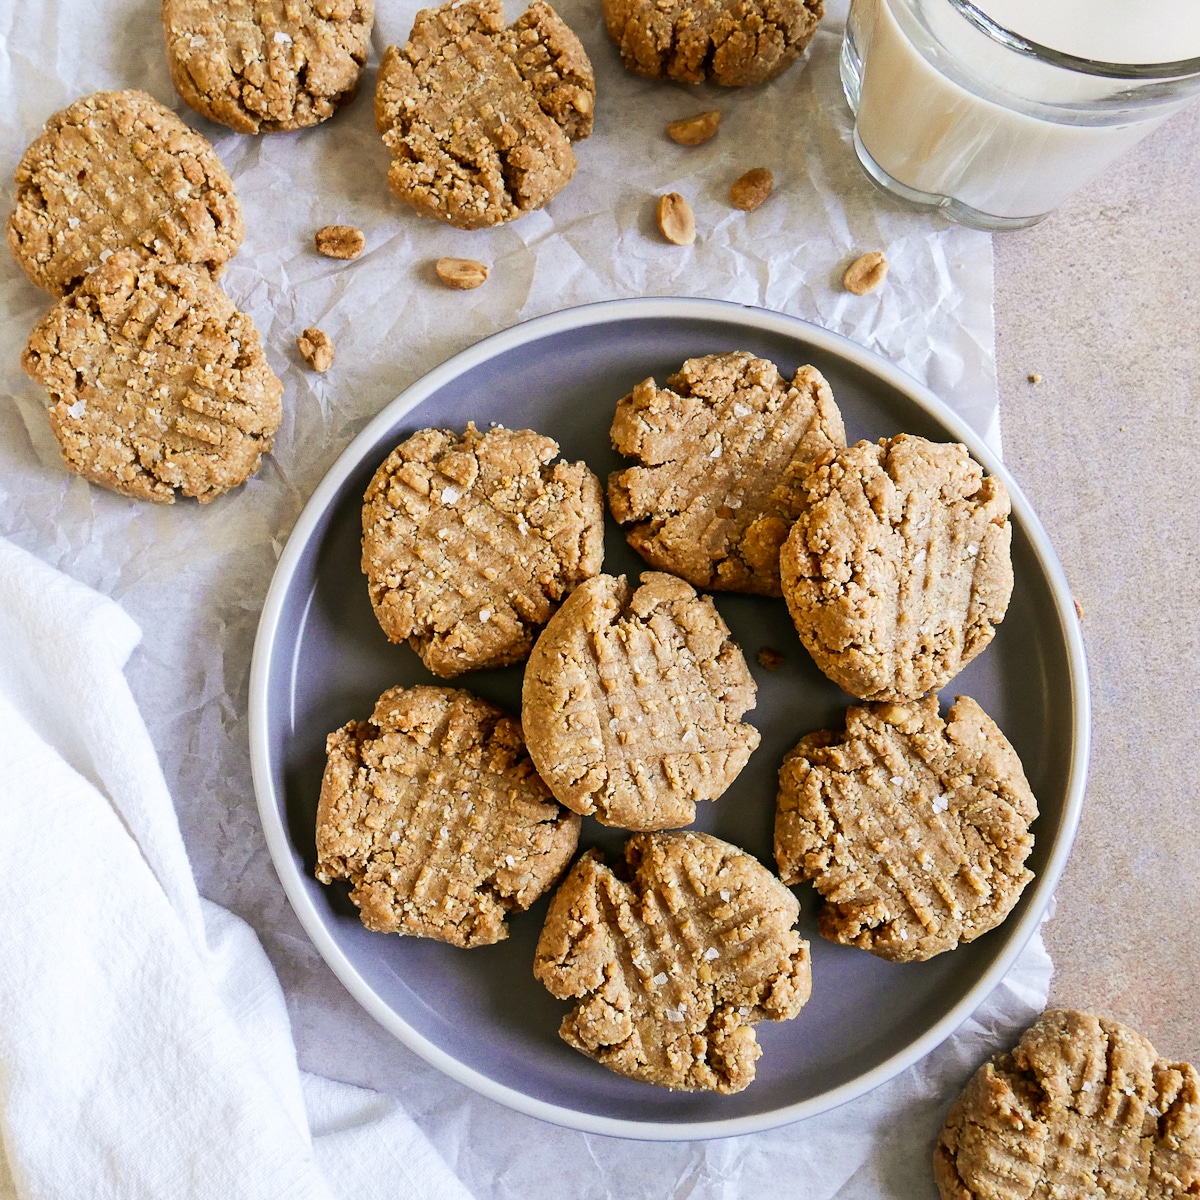 almond flour peanut butter cookies arranged on a gray plate with glass of milk in background.